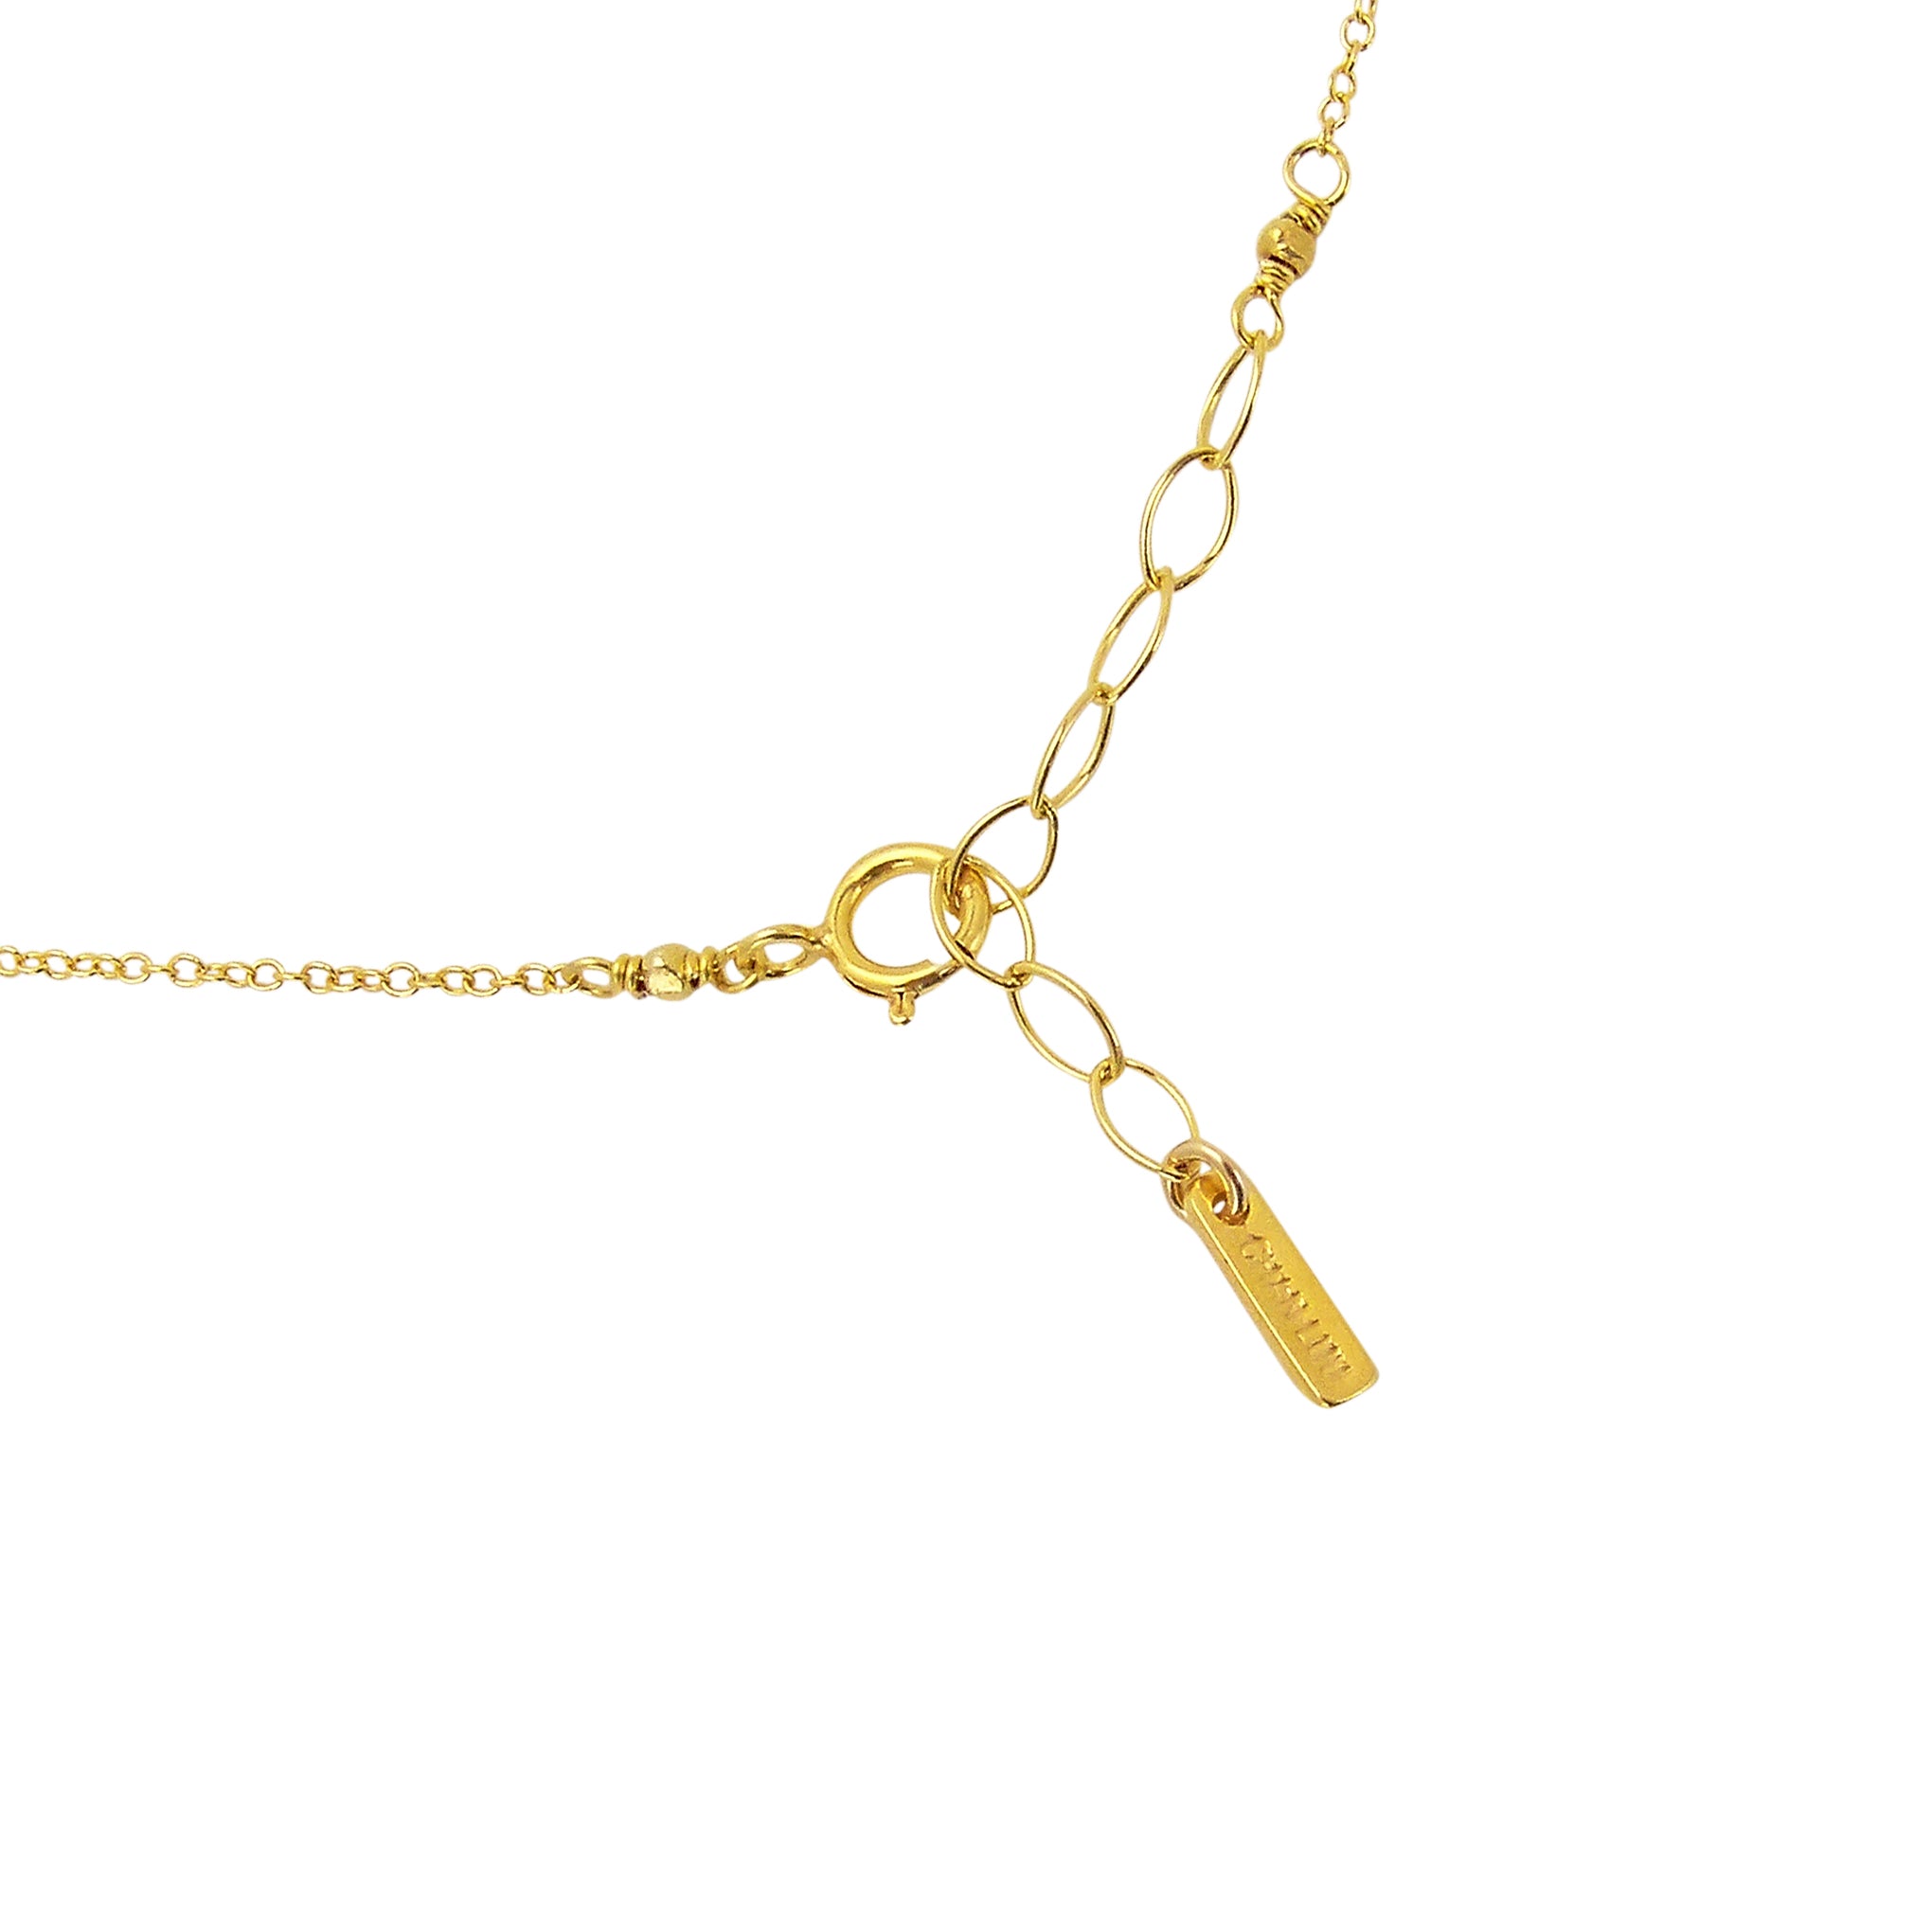 Chan Luu Petite Gold Vermeil Chain Necklace with Horn Pendant